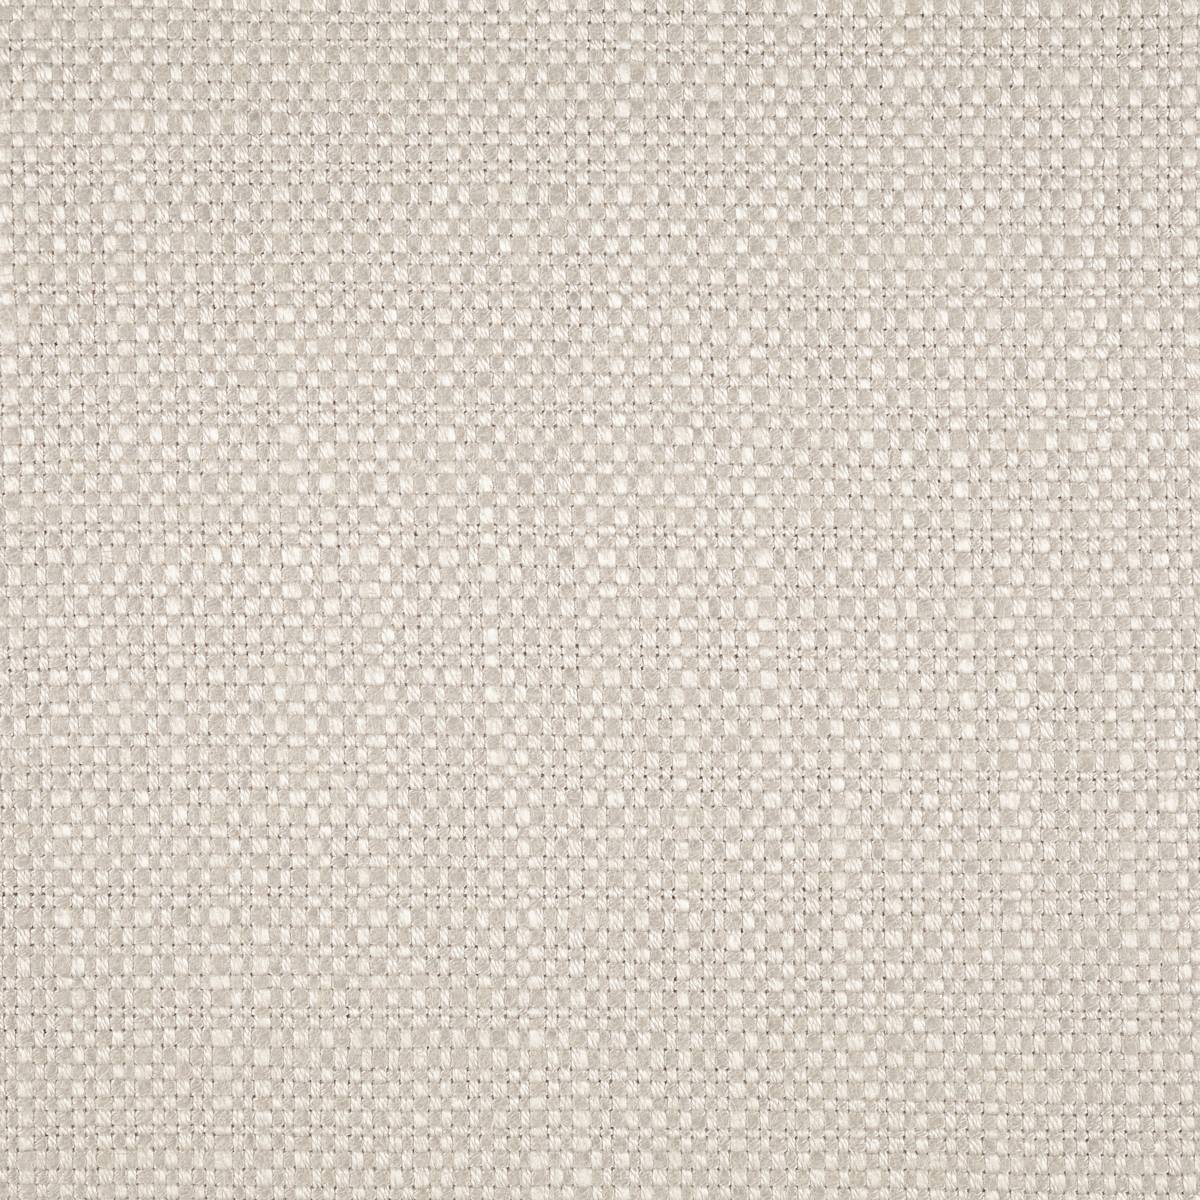 Lustre Pearl Fabric by Zoffany